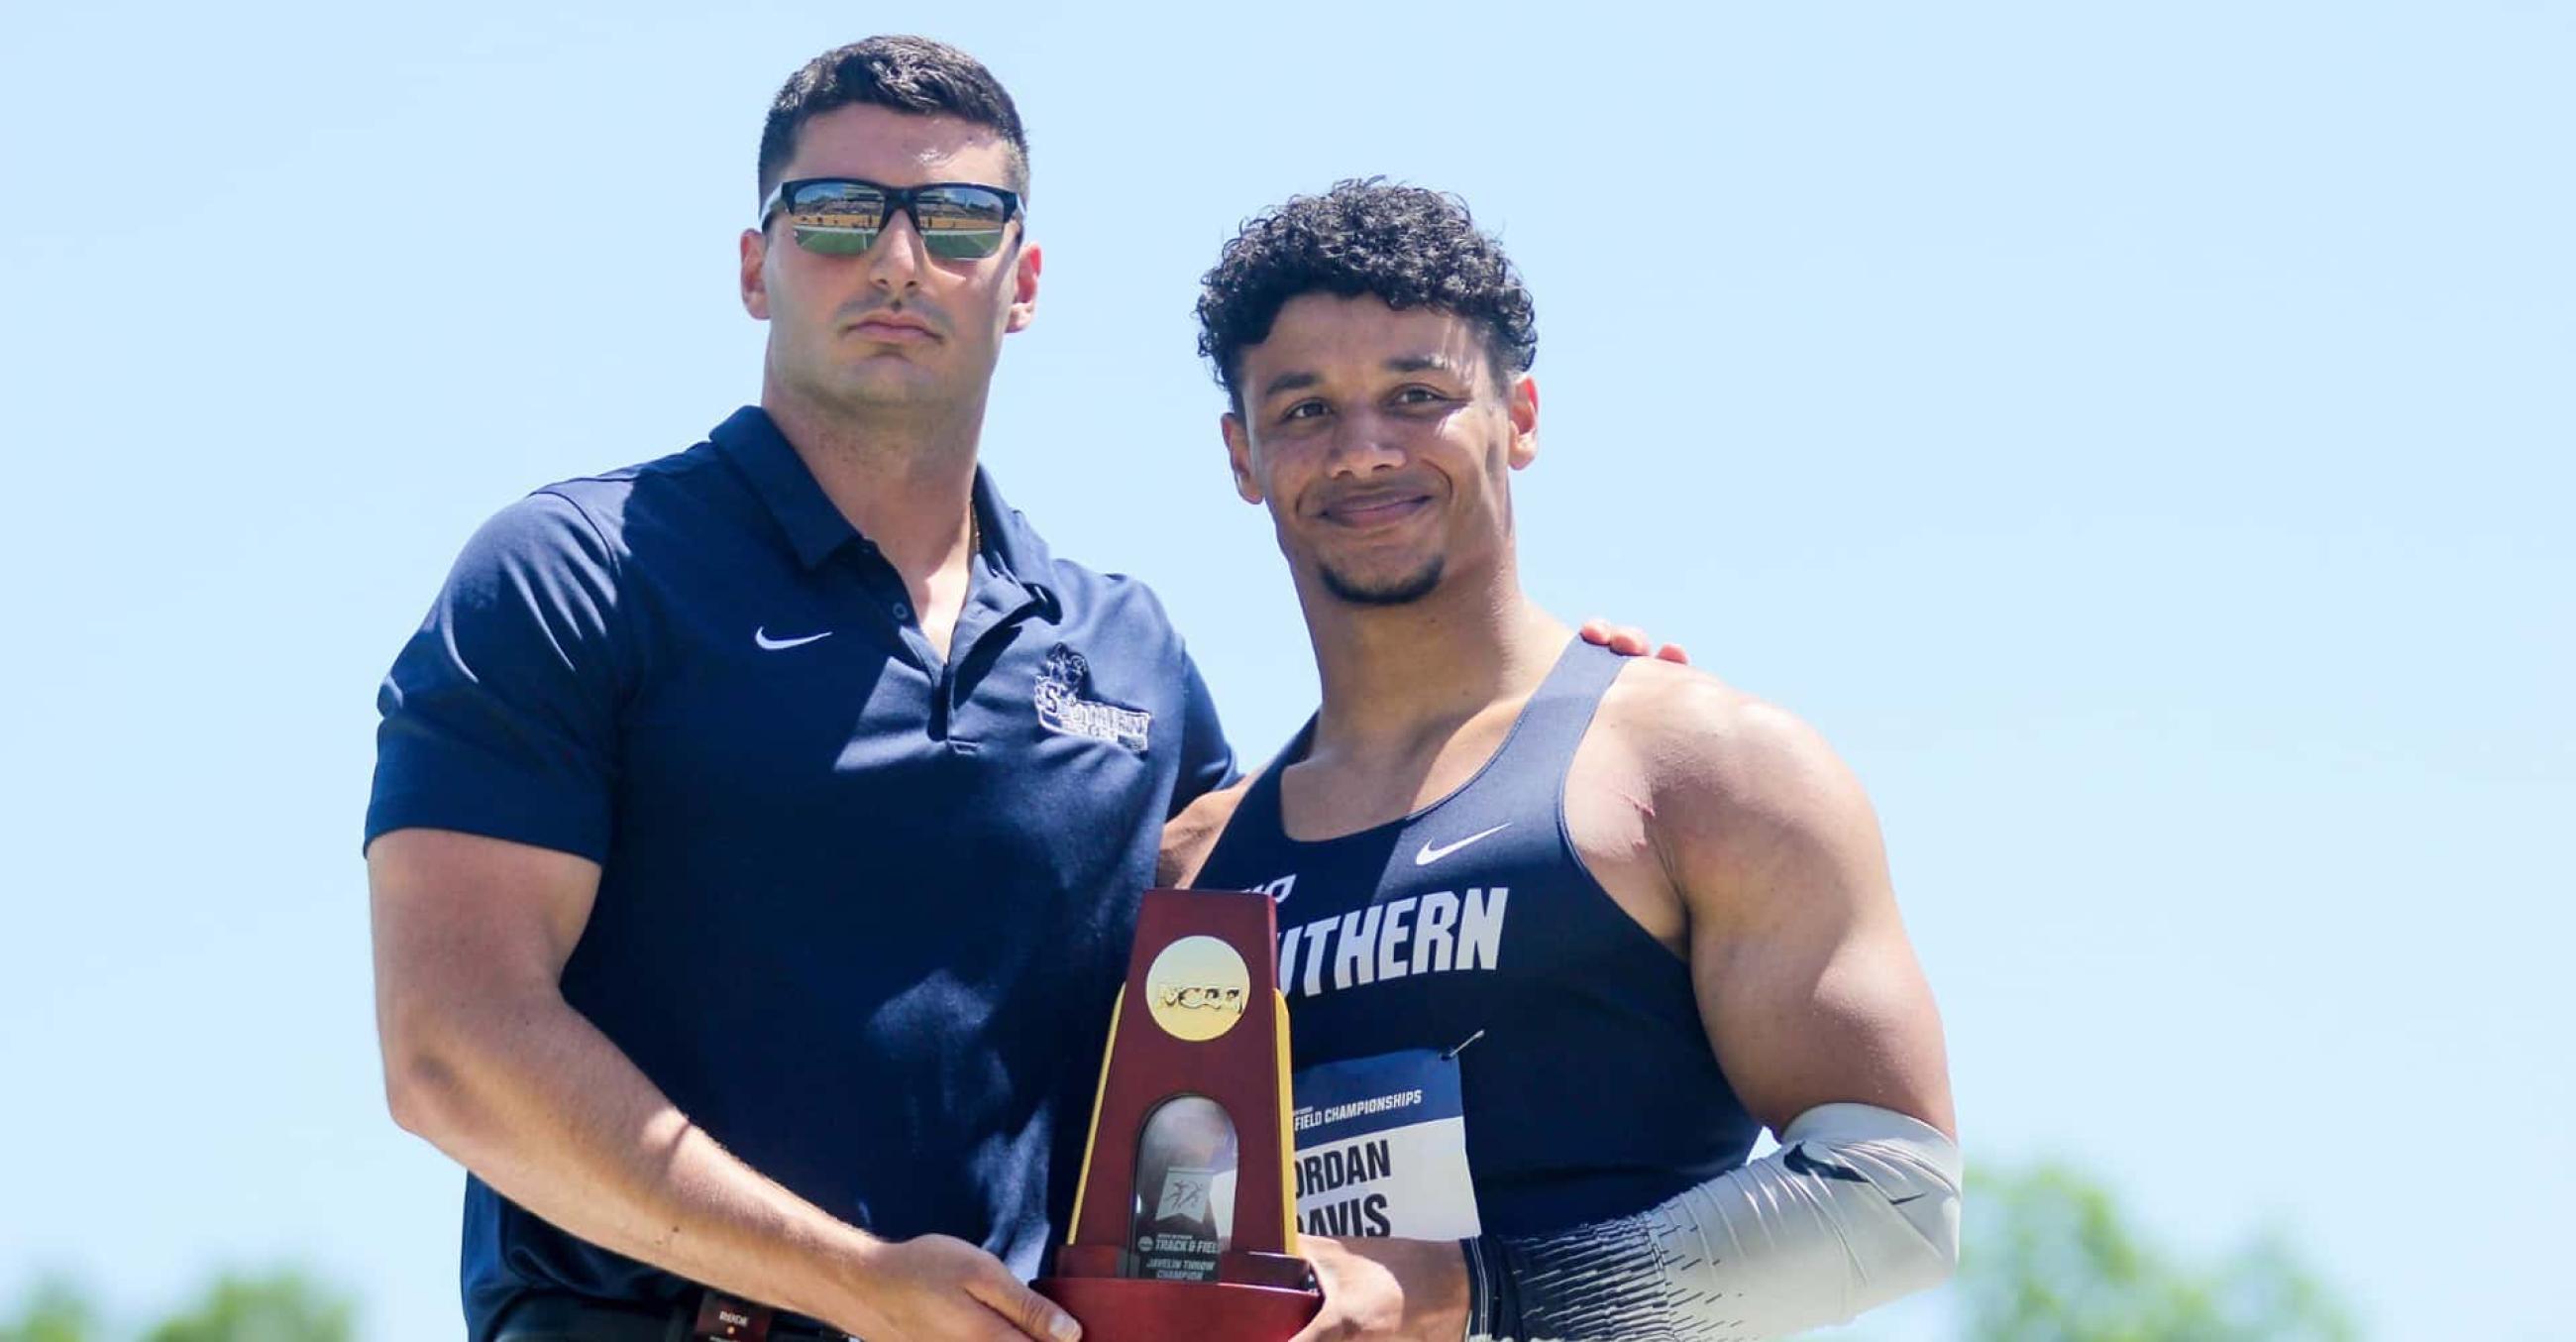  Jordan Davis, '24 (right), with Dan Labbadia, assistant men's track & field coach, after Davis won the NCAA Division II National Championship in the javelin throw